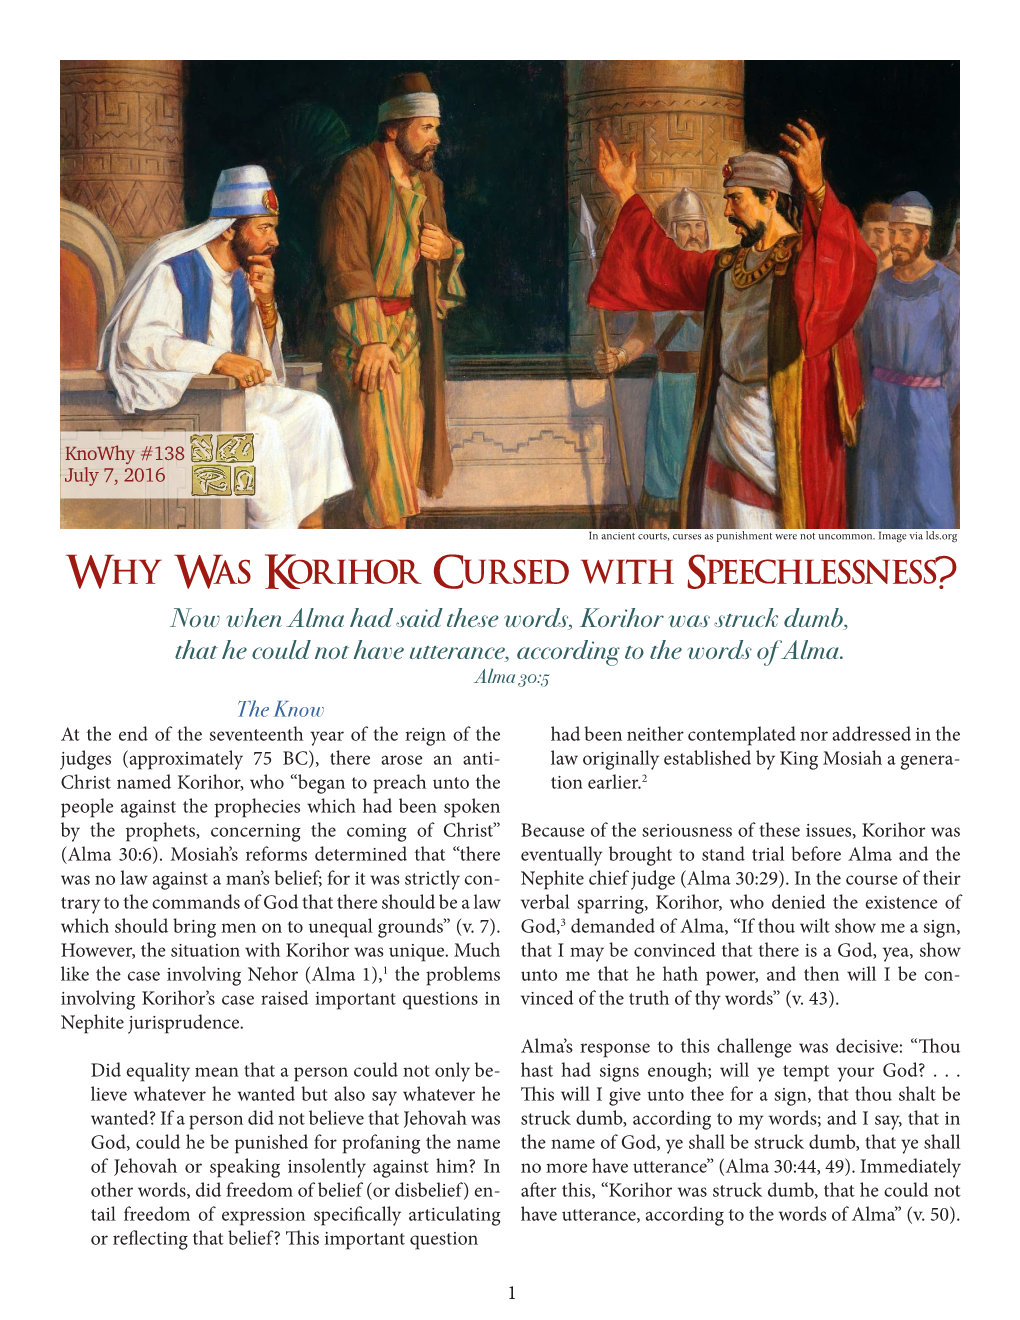 Why Was Korihor Cursed with Speechlessness?